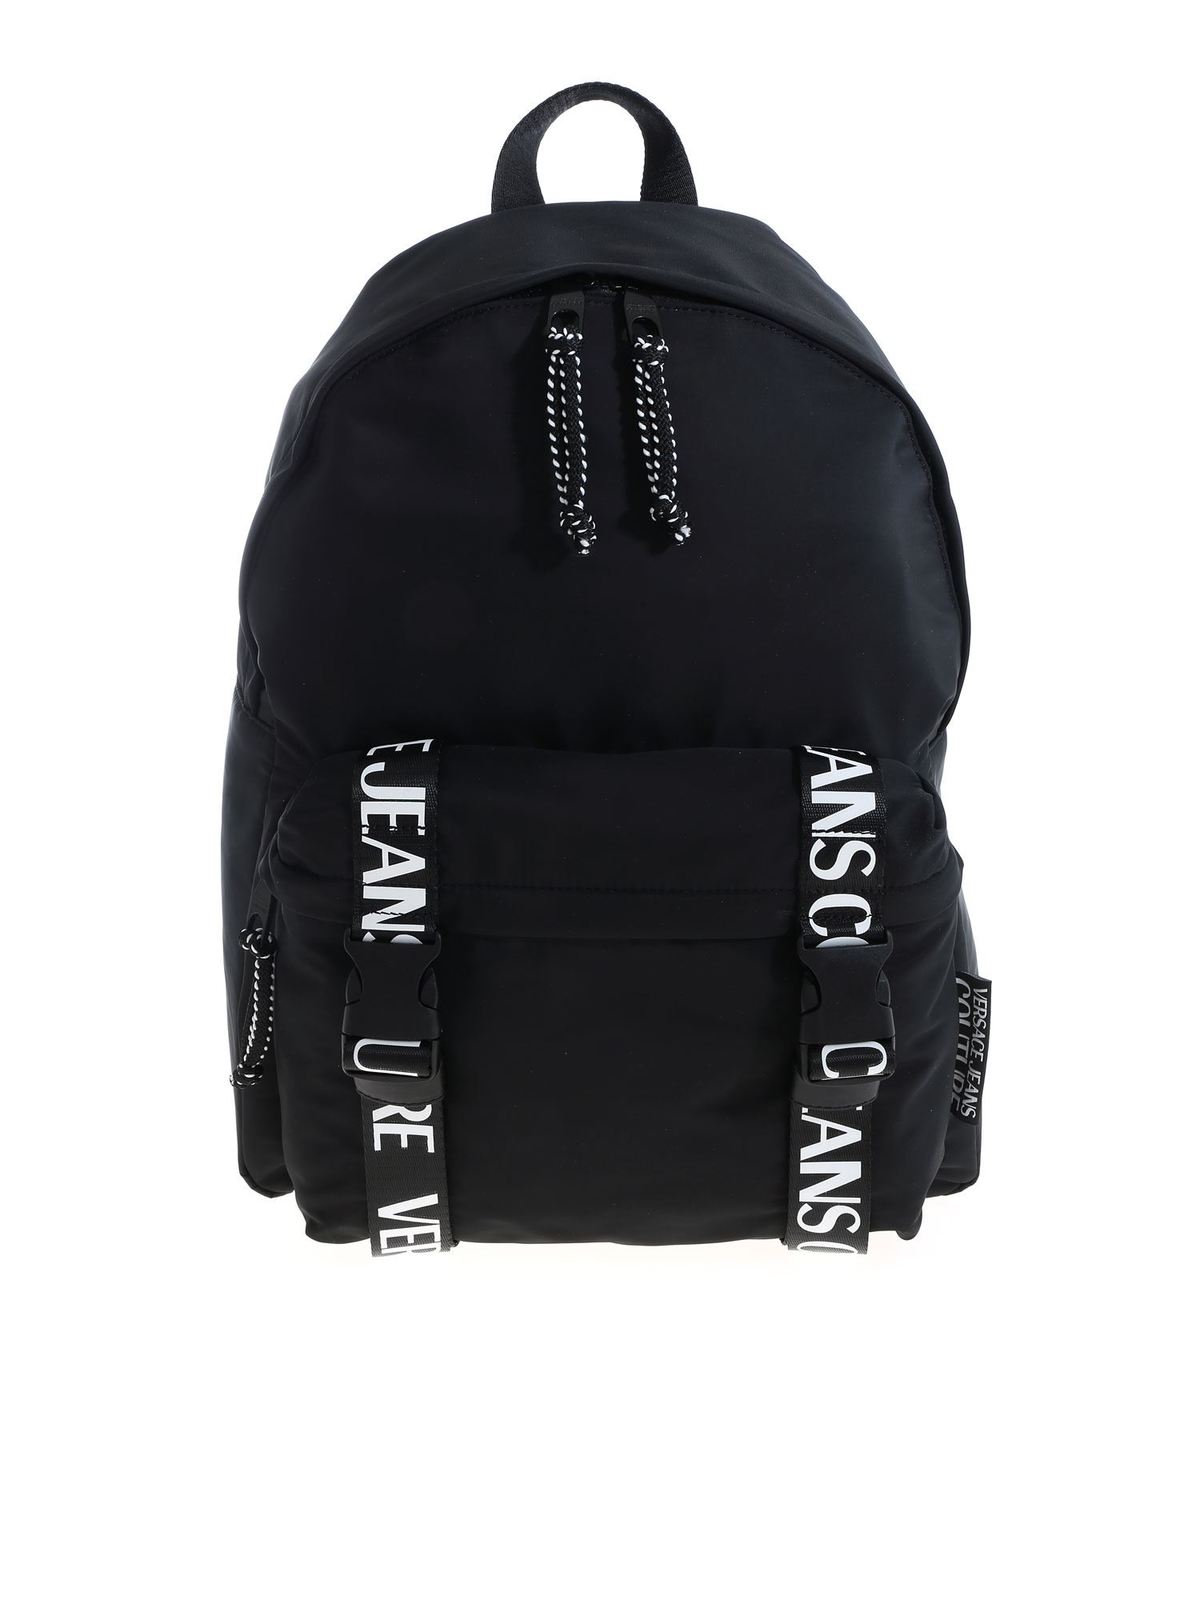 VERSACE JEANS COUTURE LOGO NYLON BACKPACK